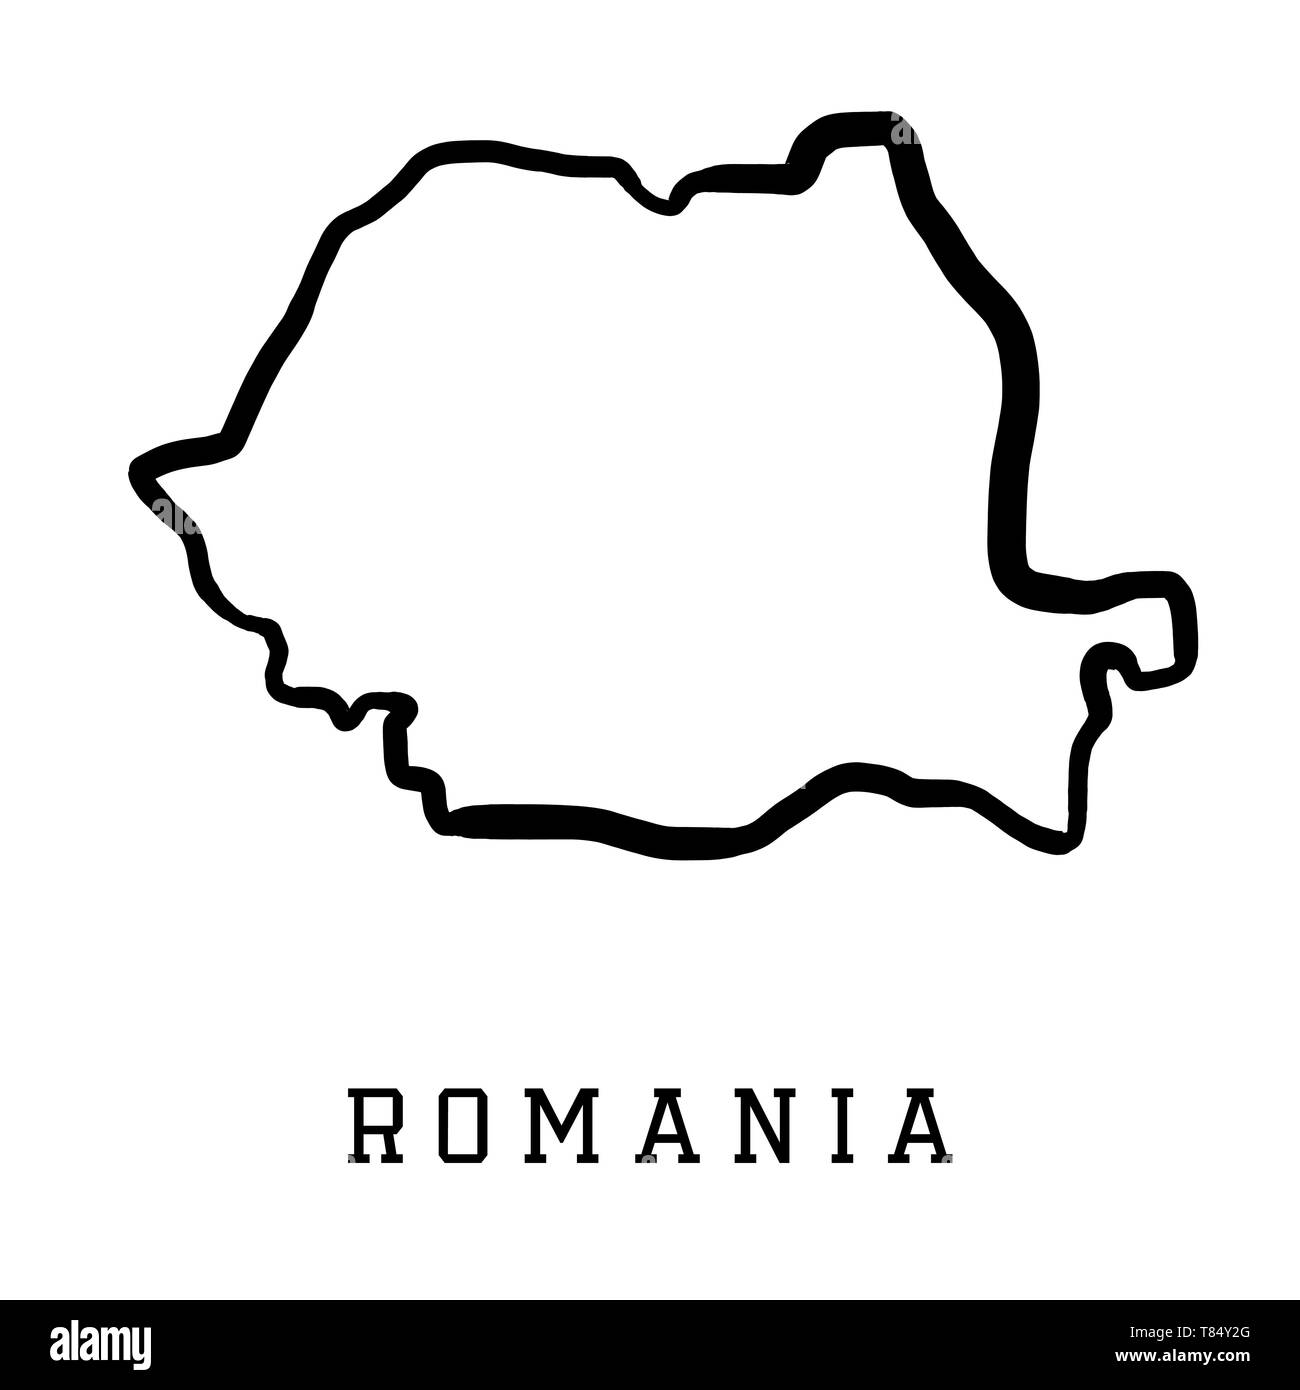 Romania map outline - smooth country shape map vector. Stock Vector